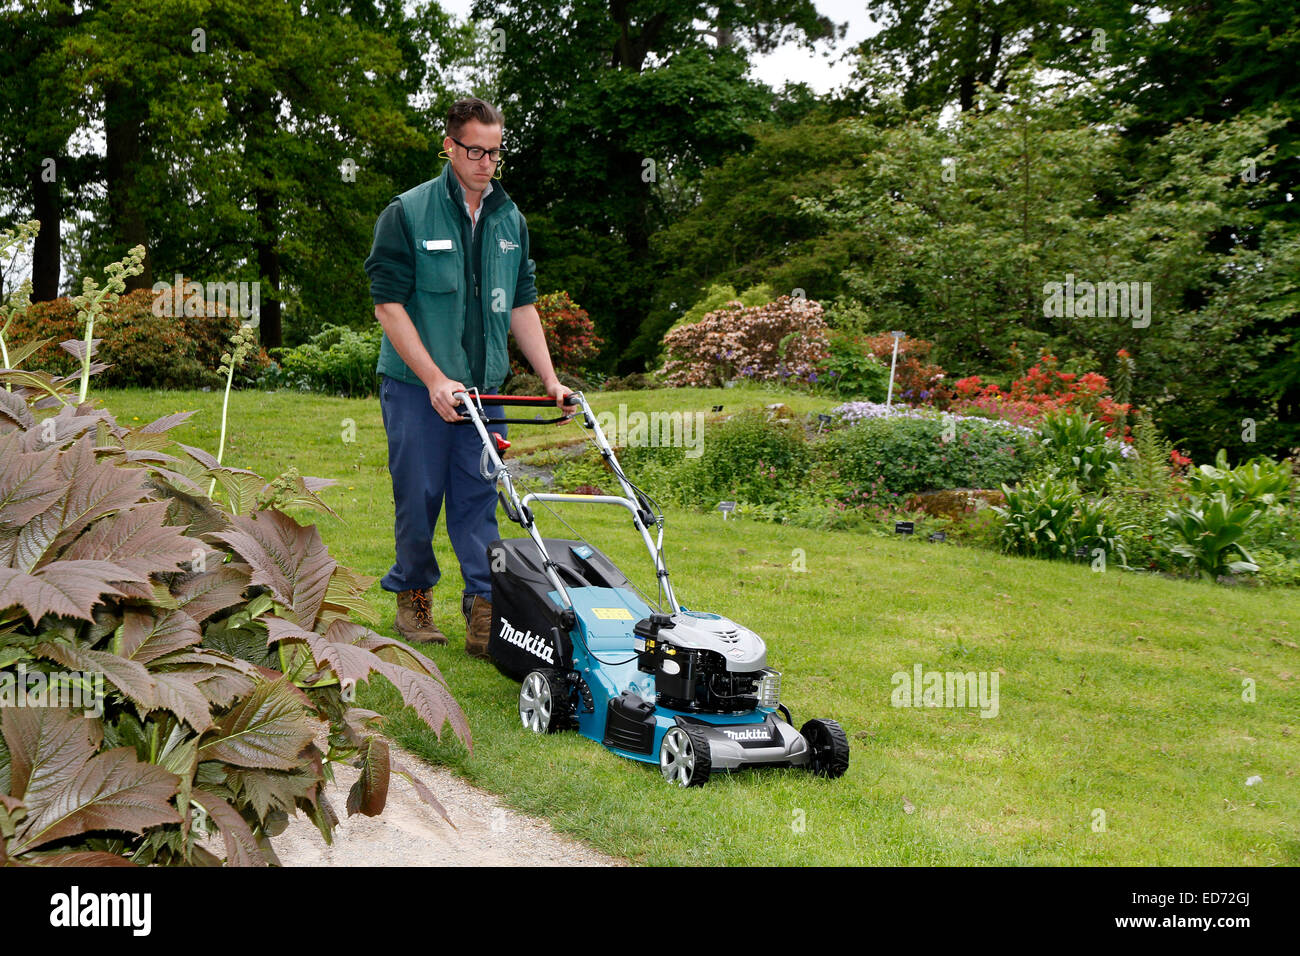 Lawn Mowing with petrol mower Stock Photo